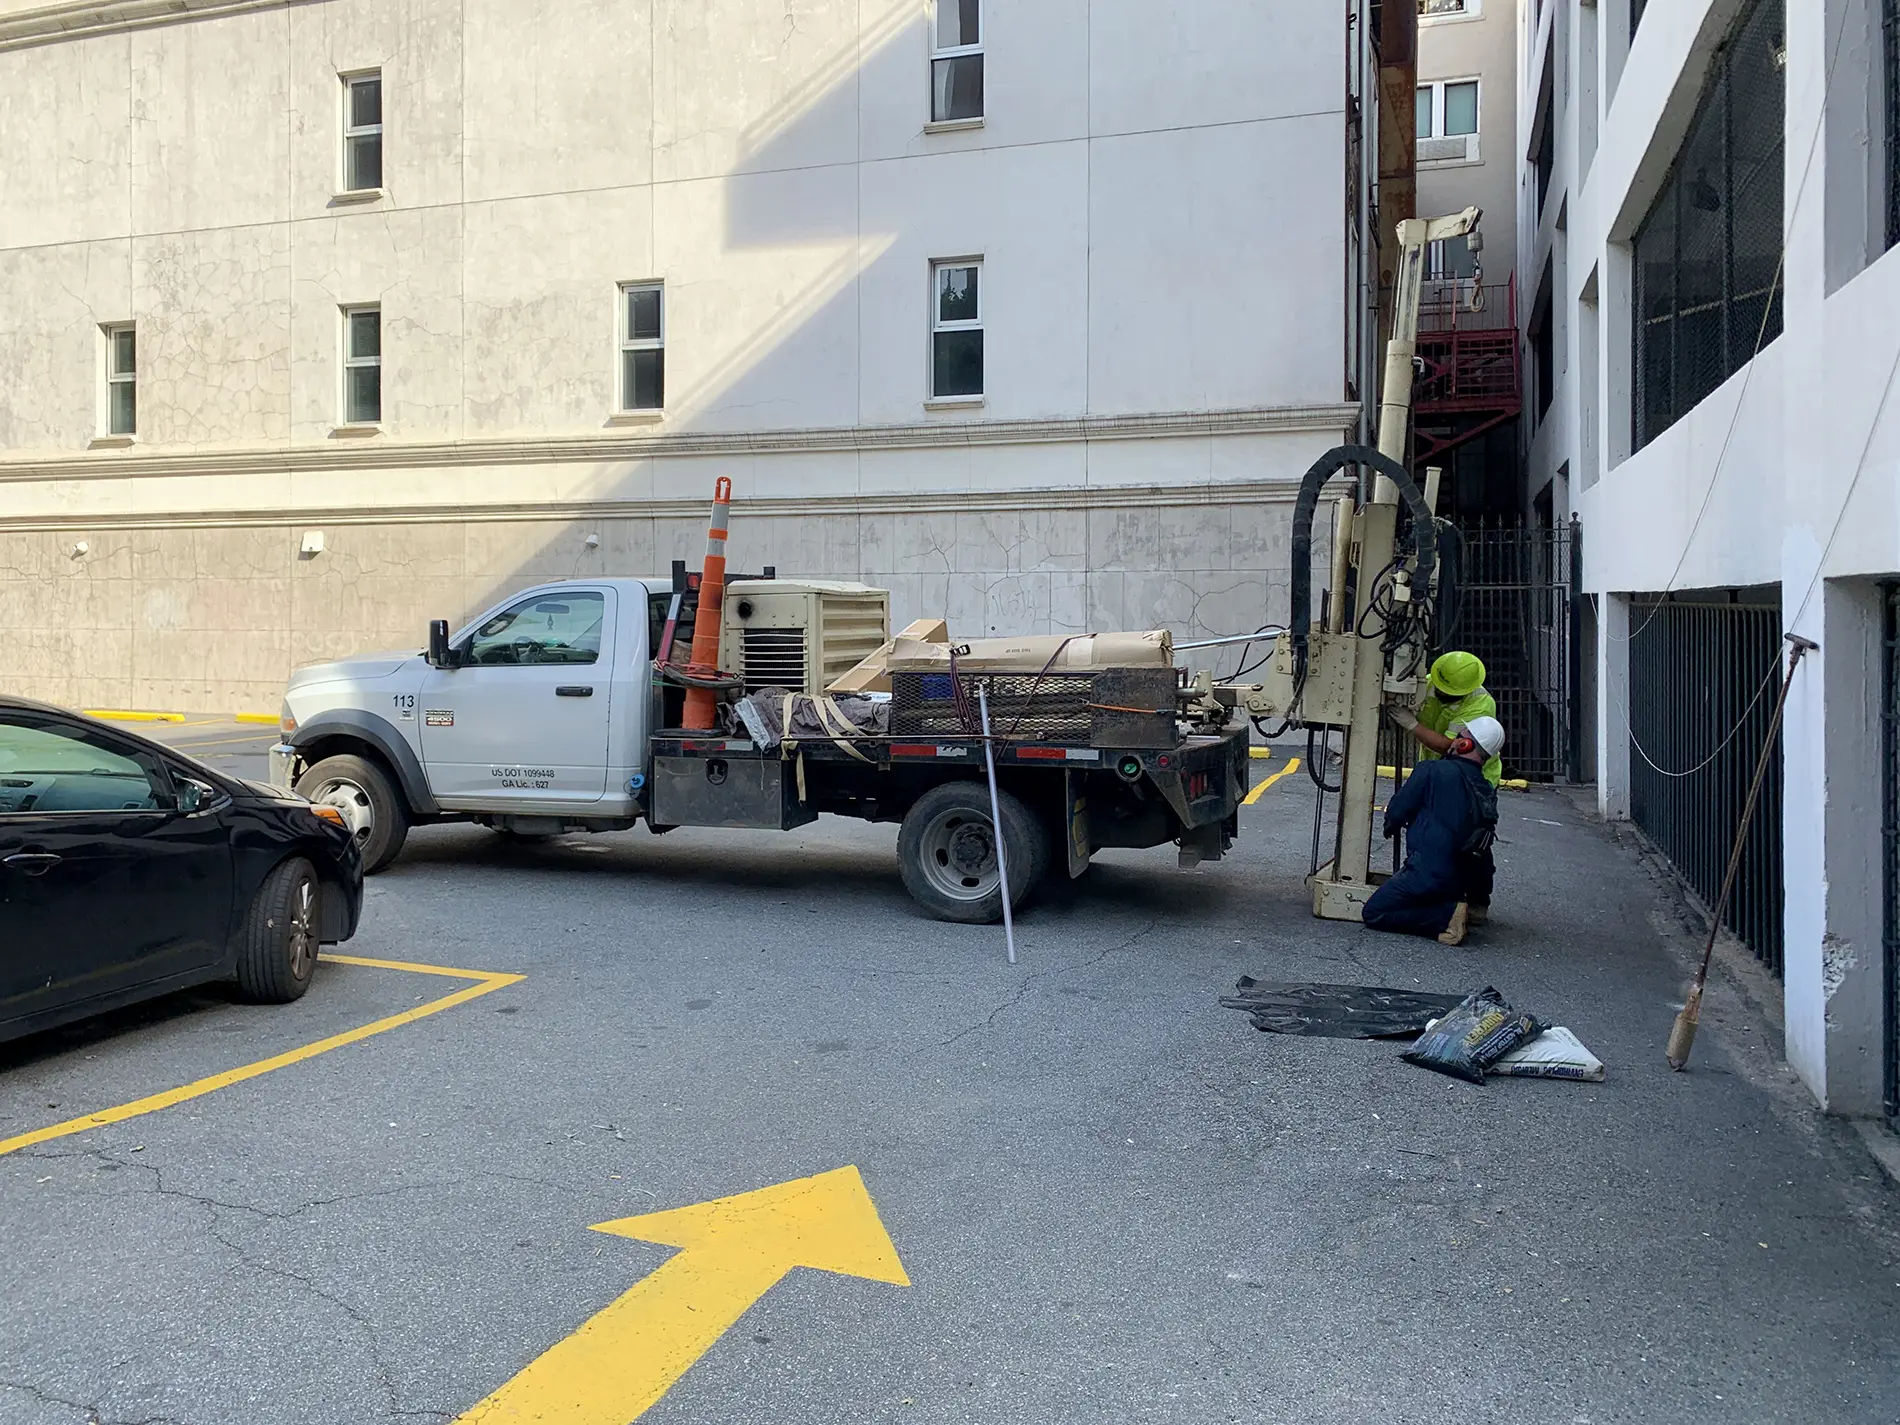 Apex employees using boring machinery for soil and groundwater sampling during a voluntary remediation program at a mixed urban high-rise and industrial area developed with a parking garage and asphalt parking lot in Atlanta, GA.